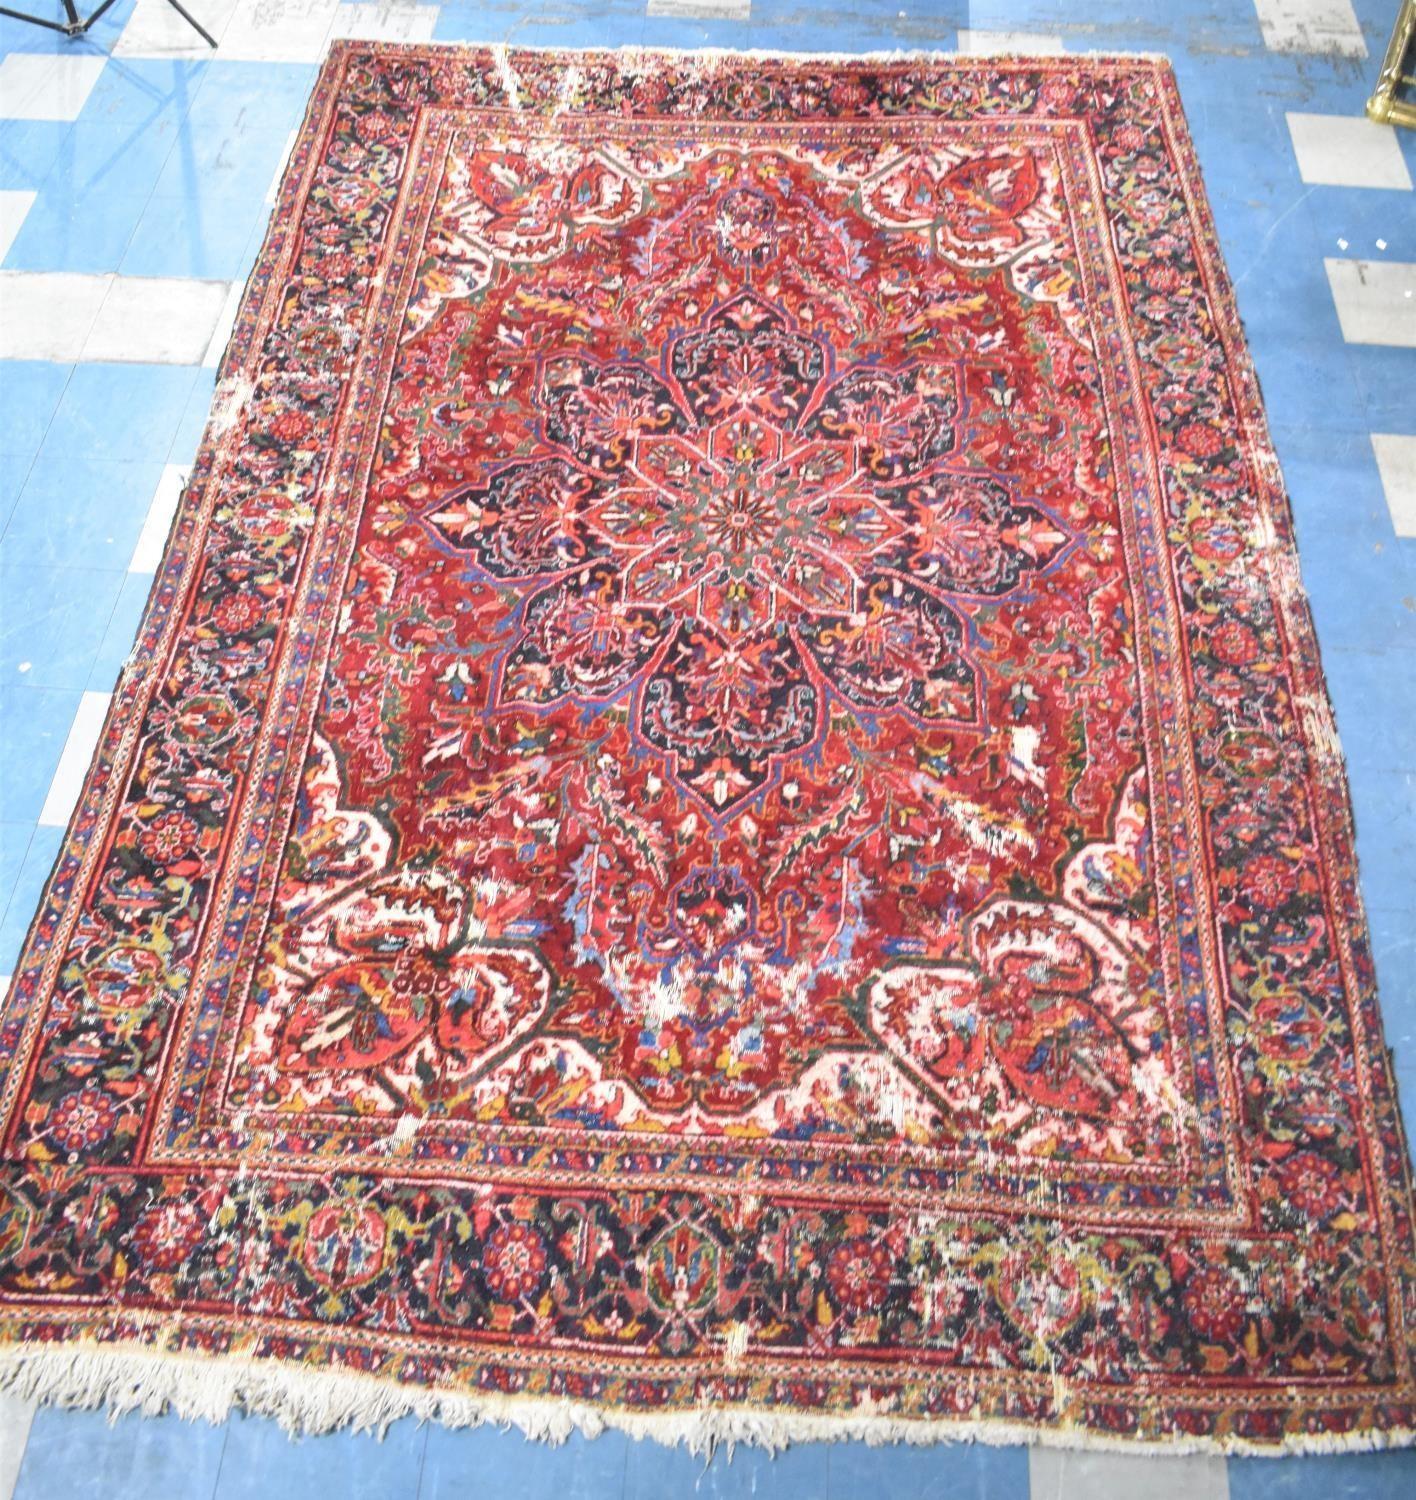 A Large Antique Persian Heriz Rug on Red Ground, Some Wear and Condition Issues, 340x240cms - Bild 2 aus 6